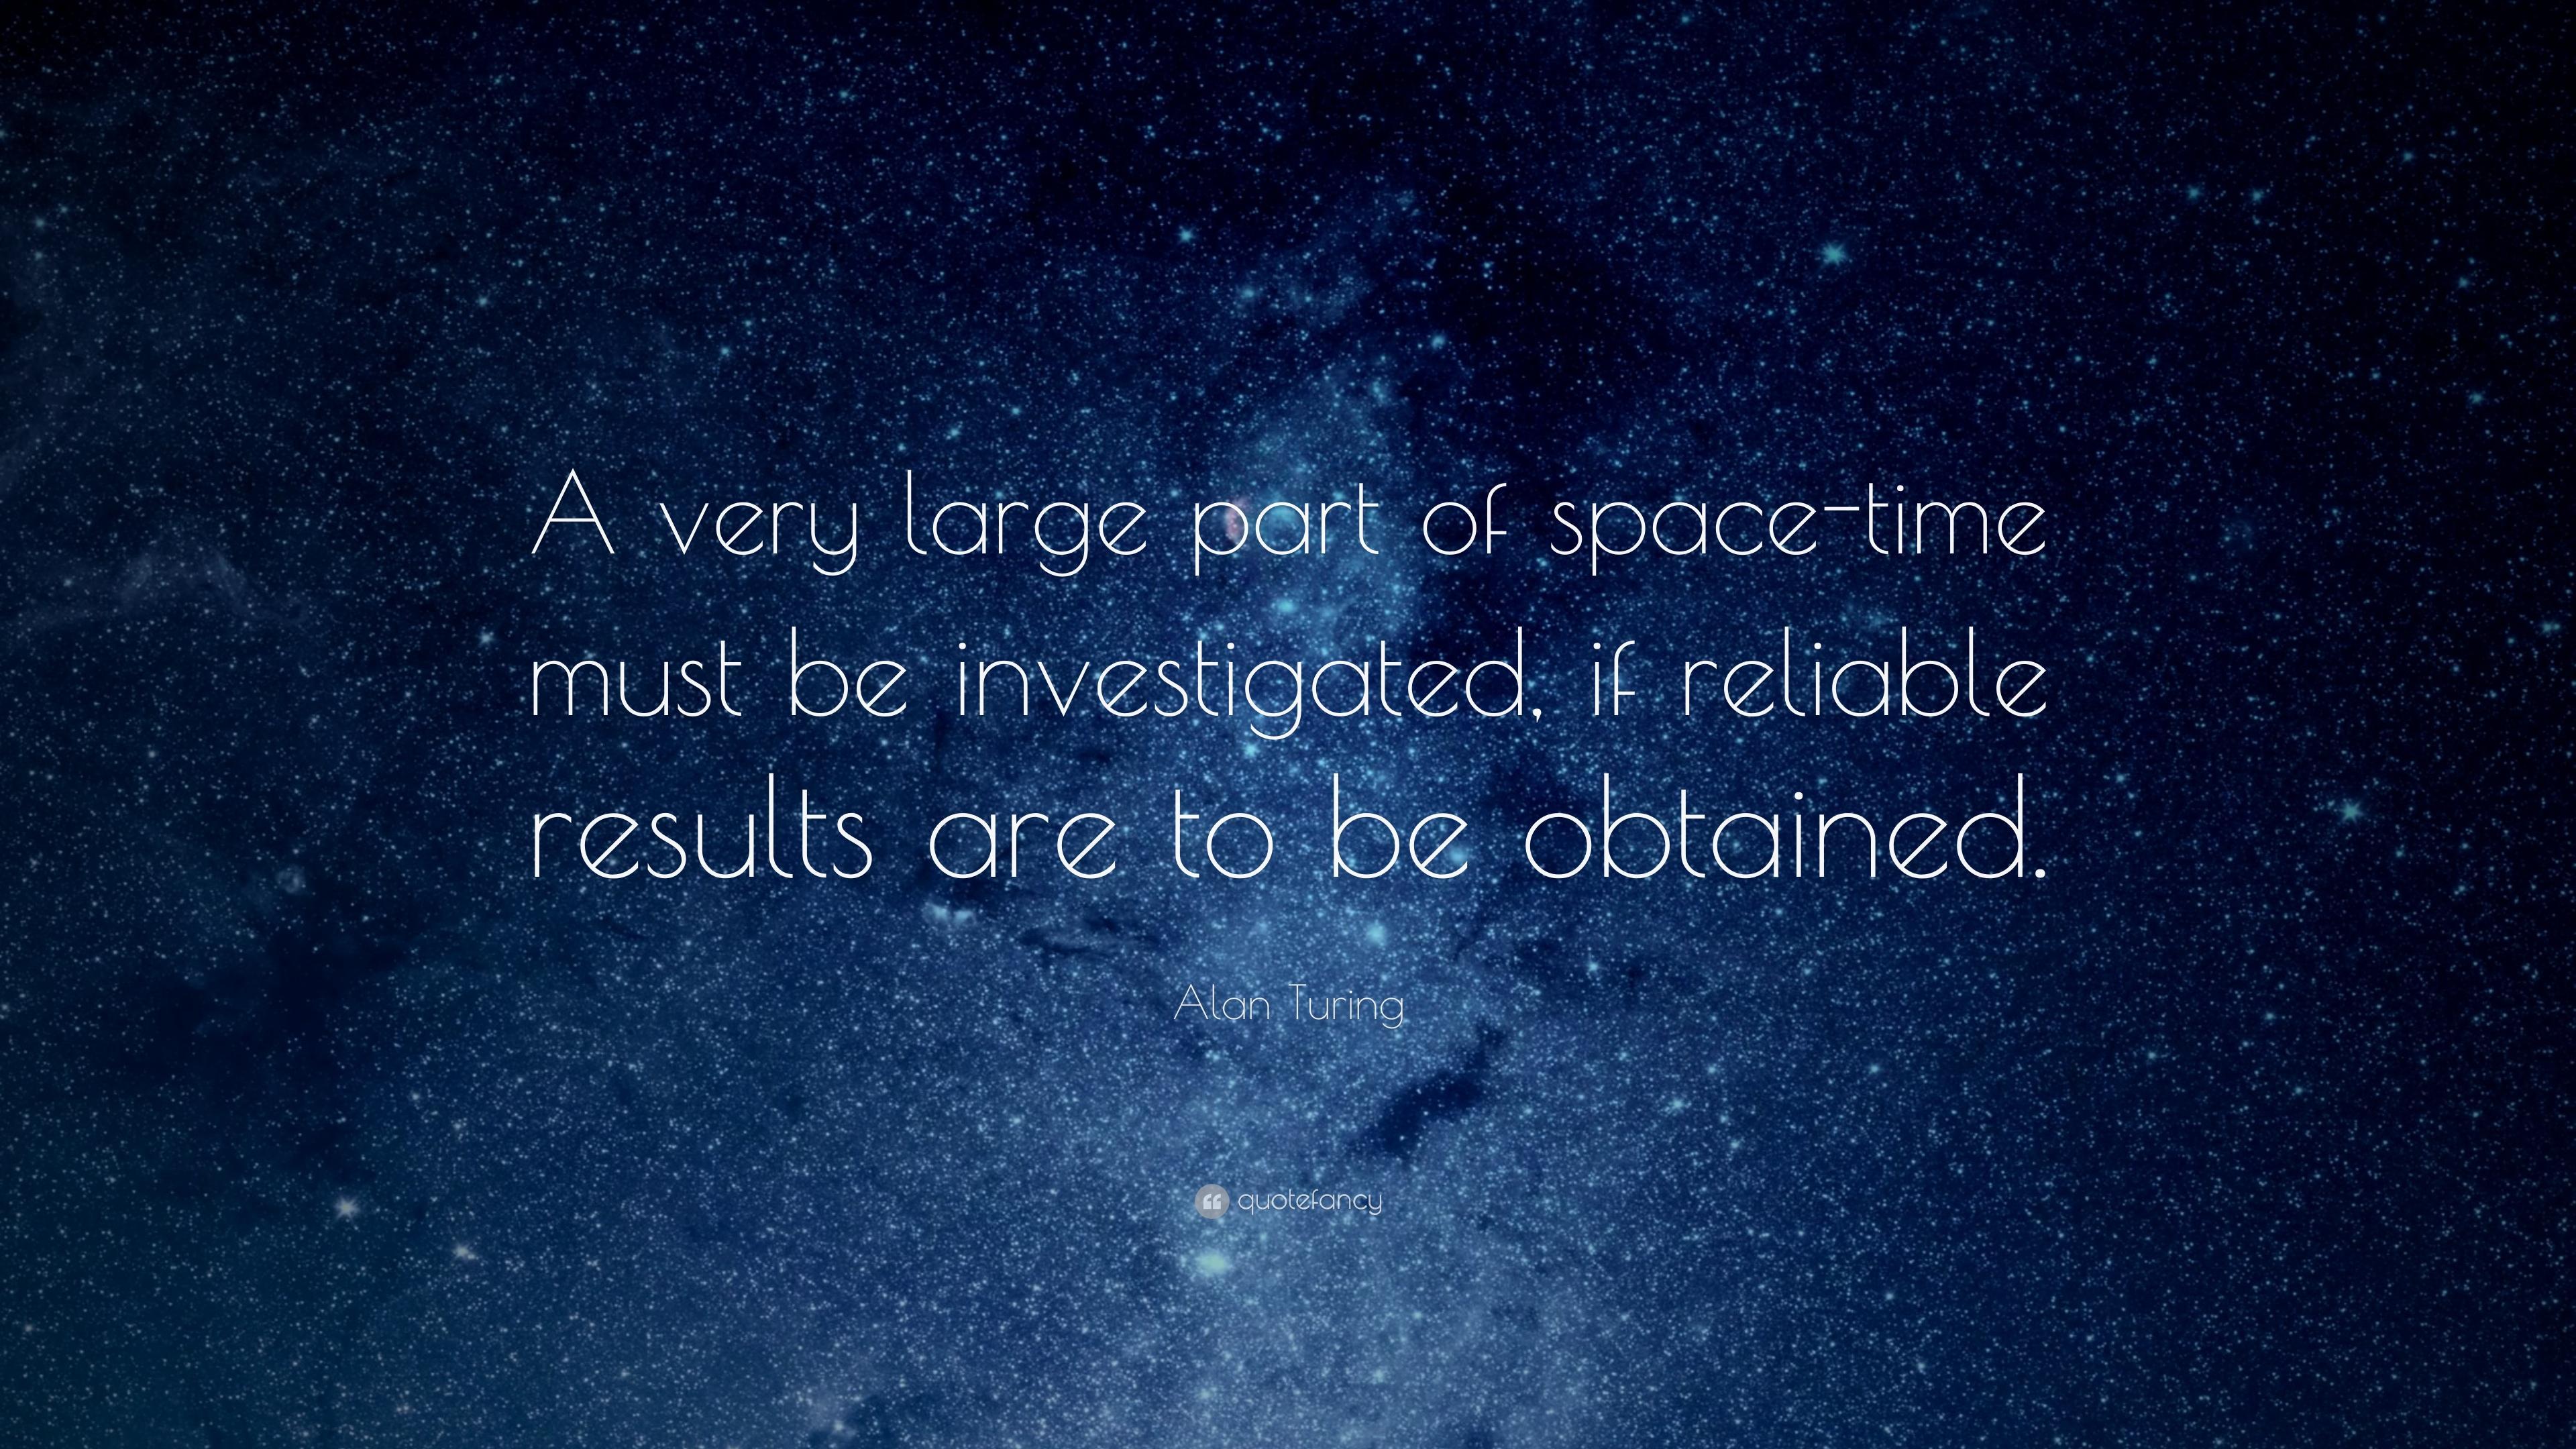 Alan Turing Quote: “A Very Large Part Of Space Time Must Be Investigated, If Reliable Results Are To Be Obtained.” (13 Wallpaper)